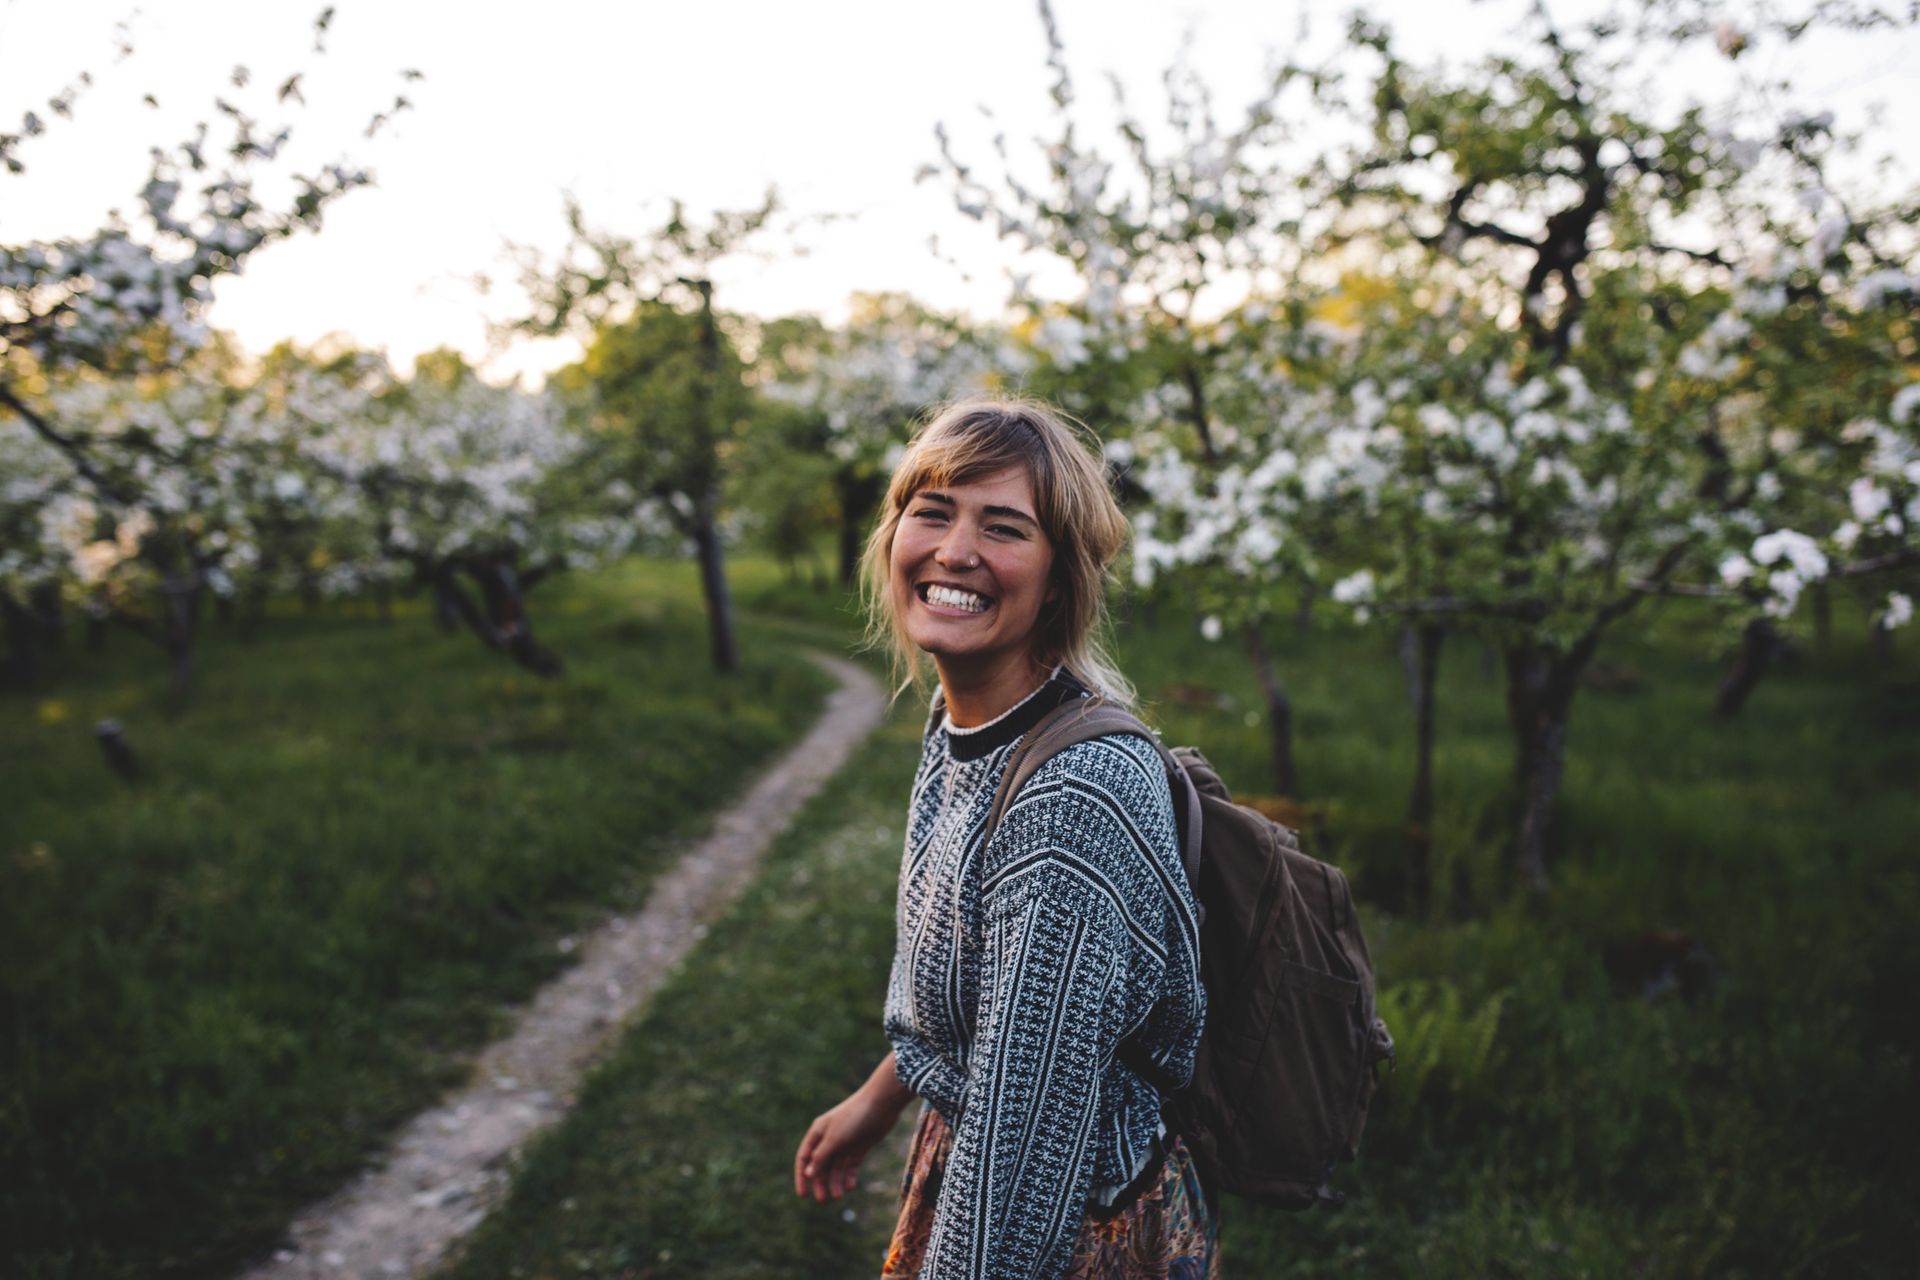 A woman smiling to the camera among blooming apple trees.